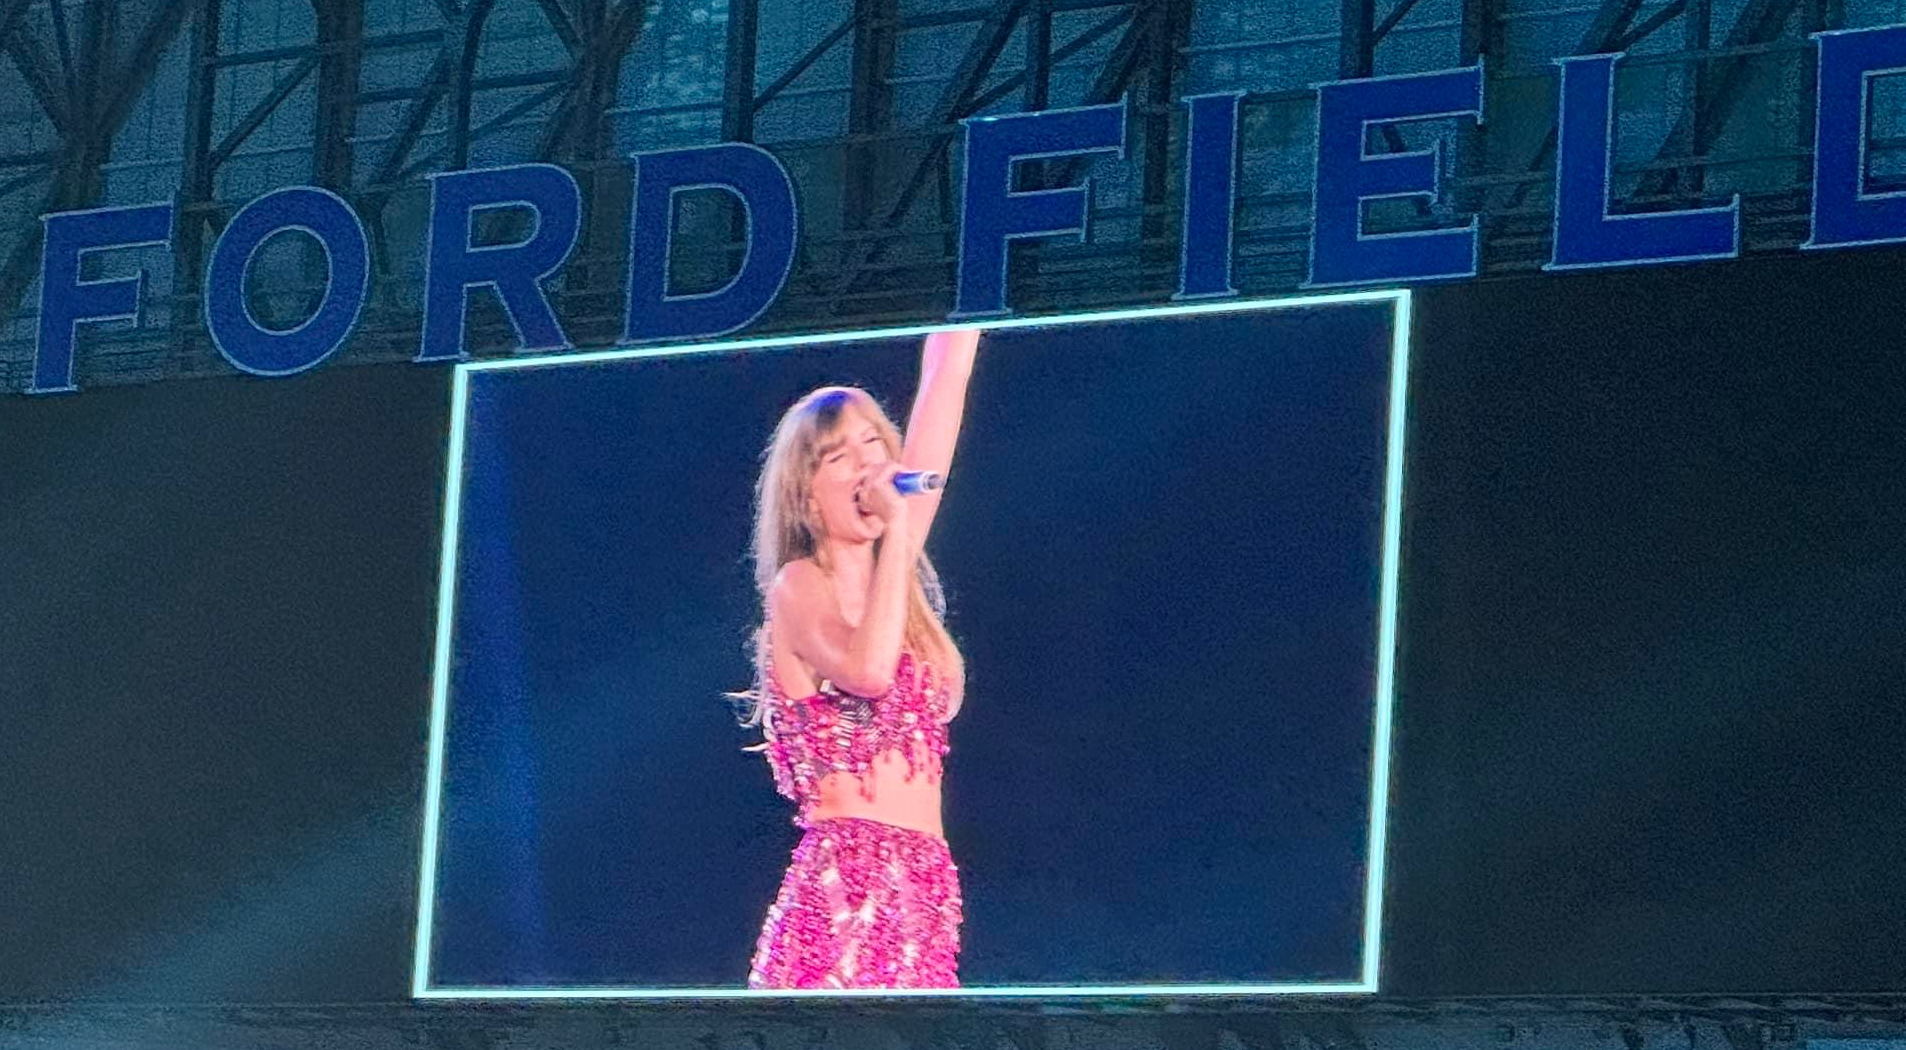 Taylor Swift singing at Ford Field